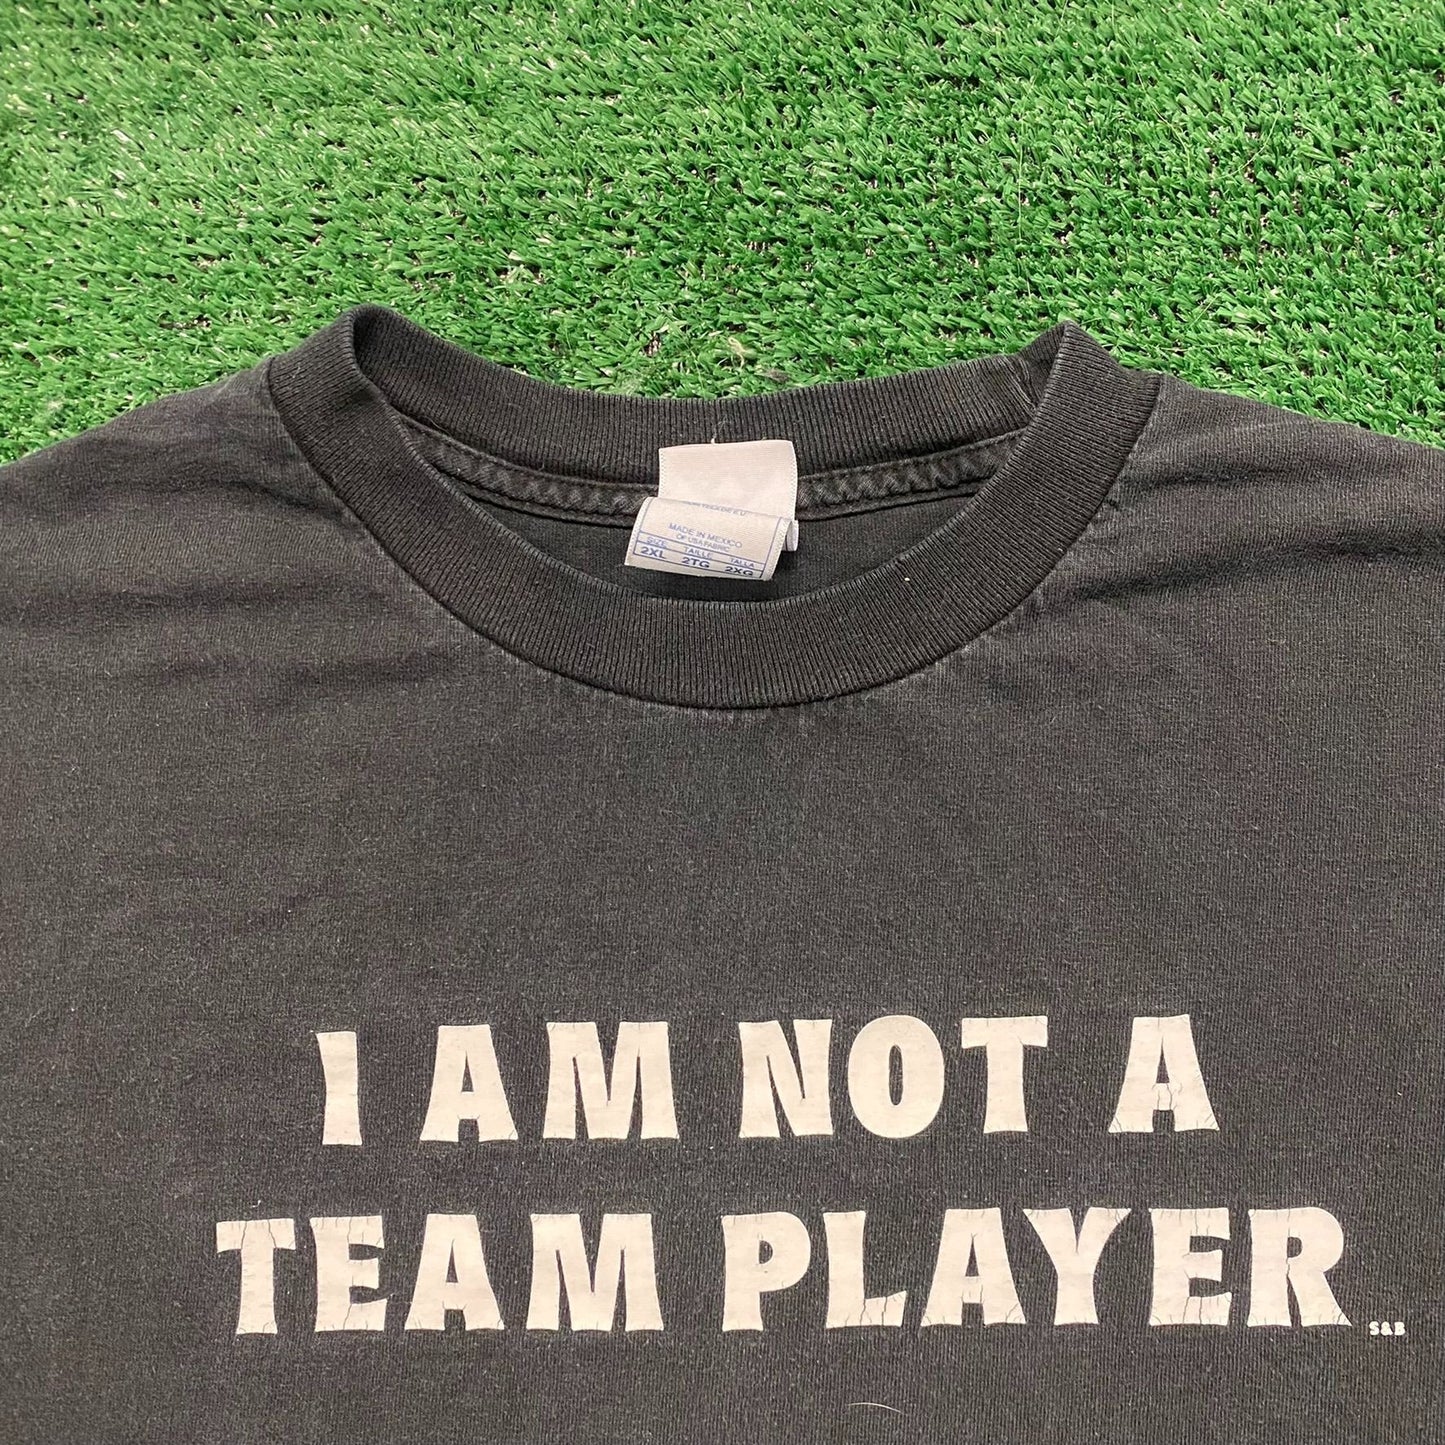 Not A Team Player Vintage Antisocial Humor T-Shirt